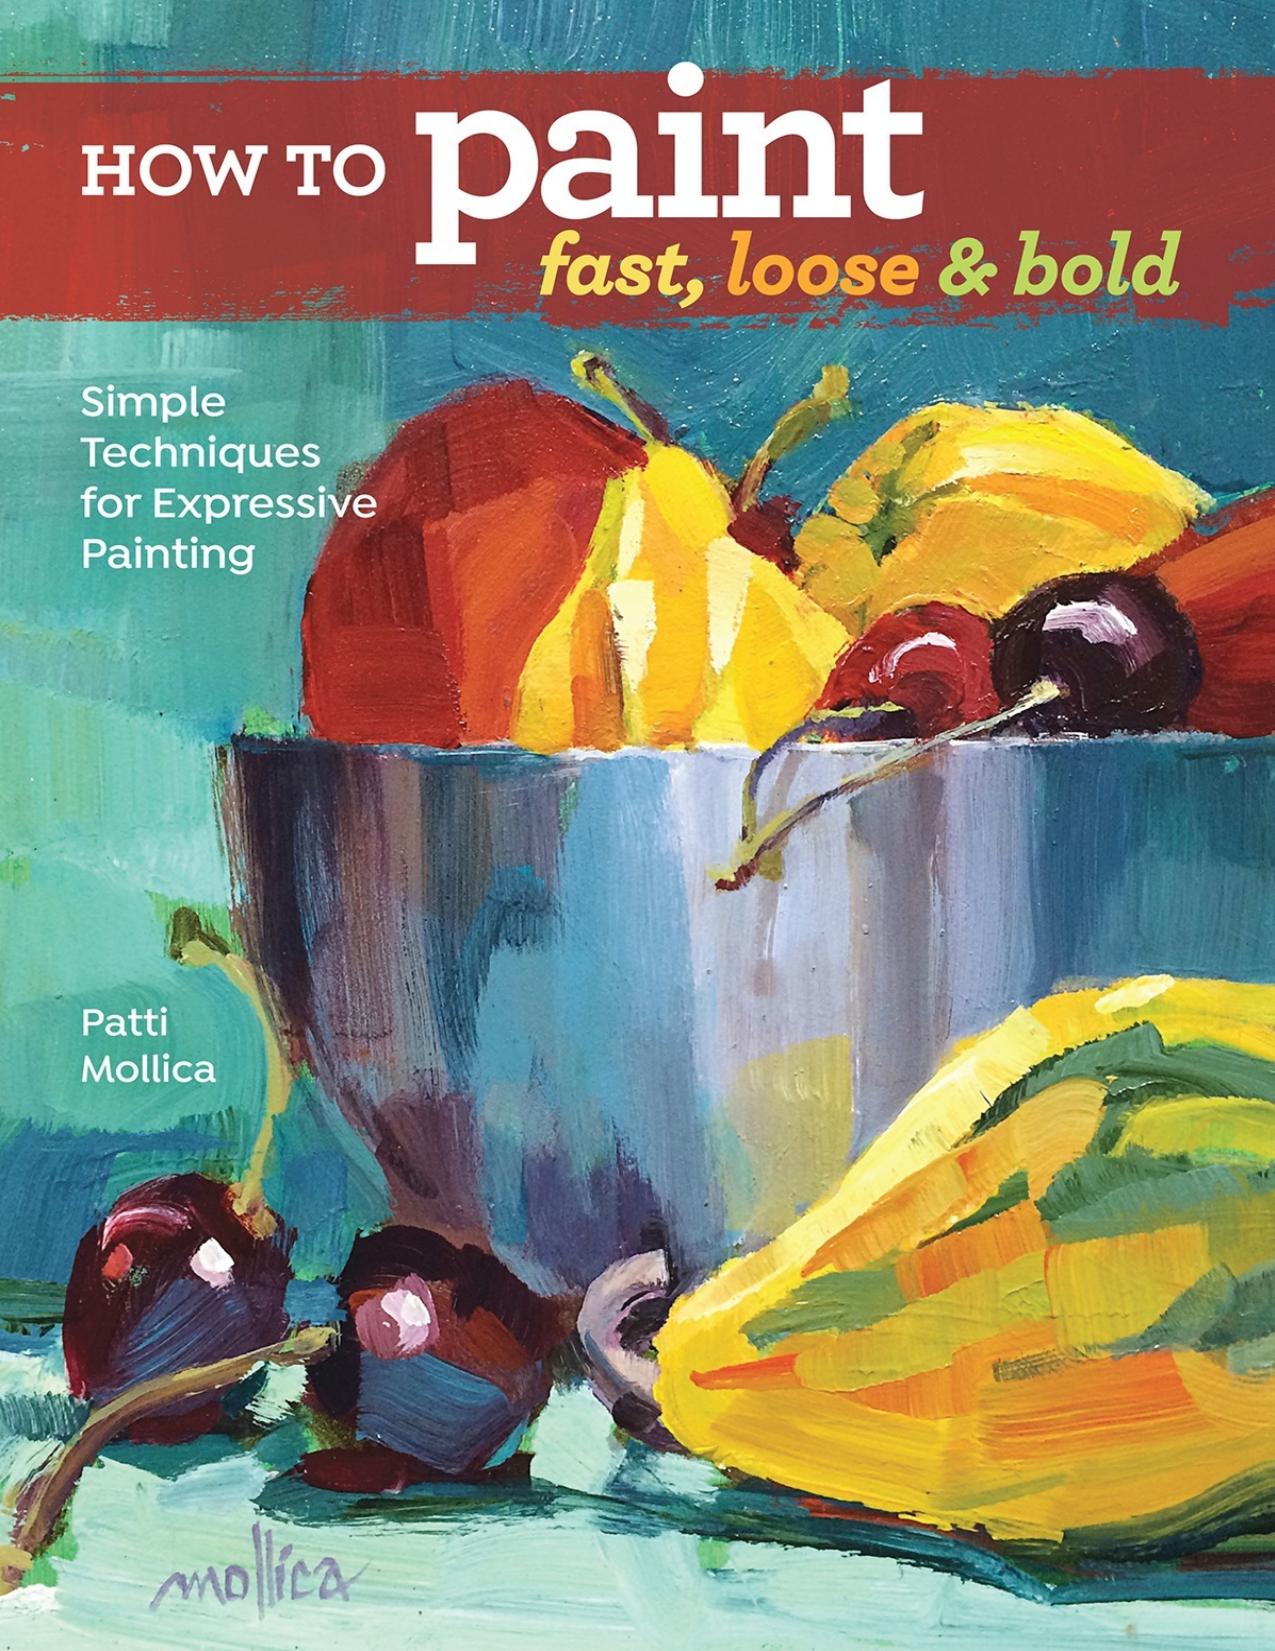 How to Paint Fast, Loose and Bold: Simple Techniques for Expressive Painting - PDFDrive.com